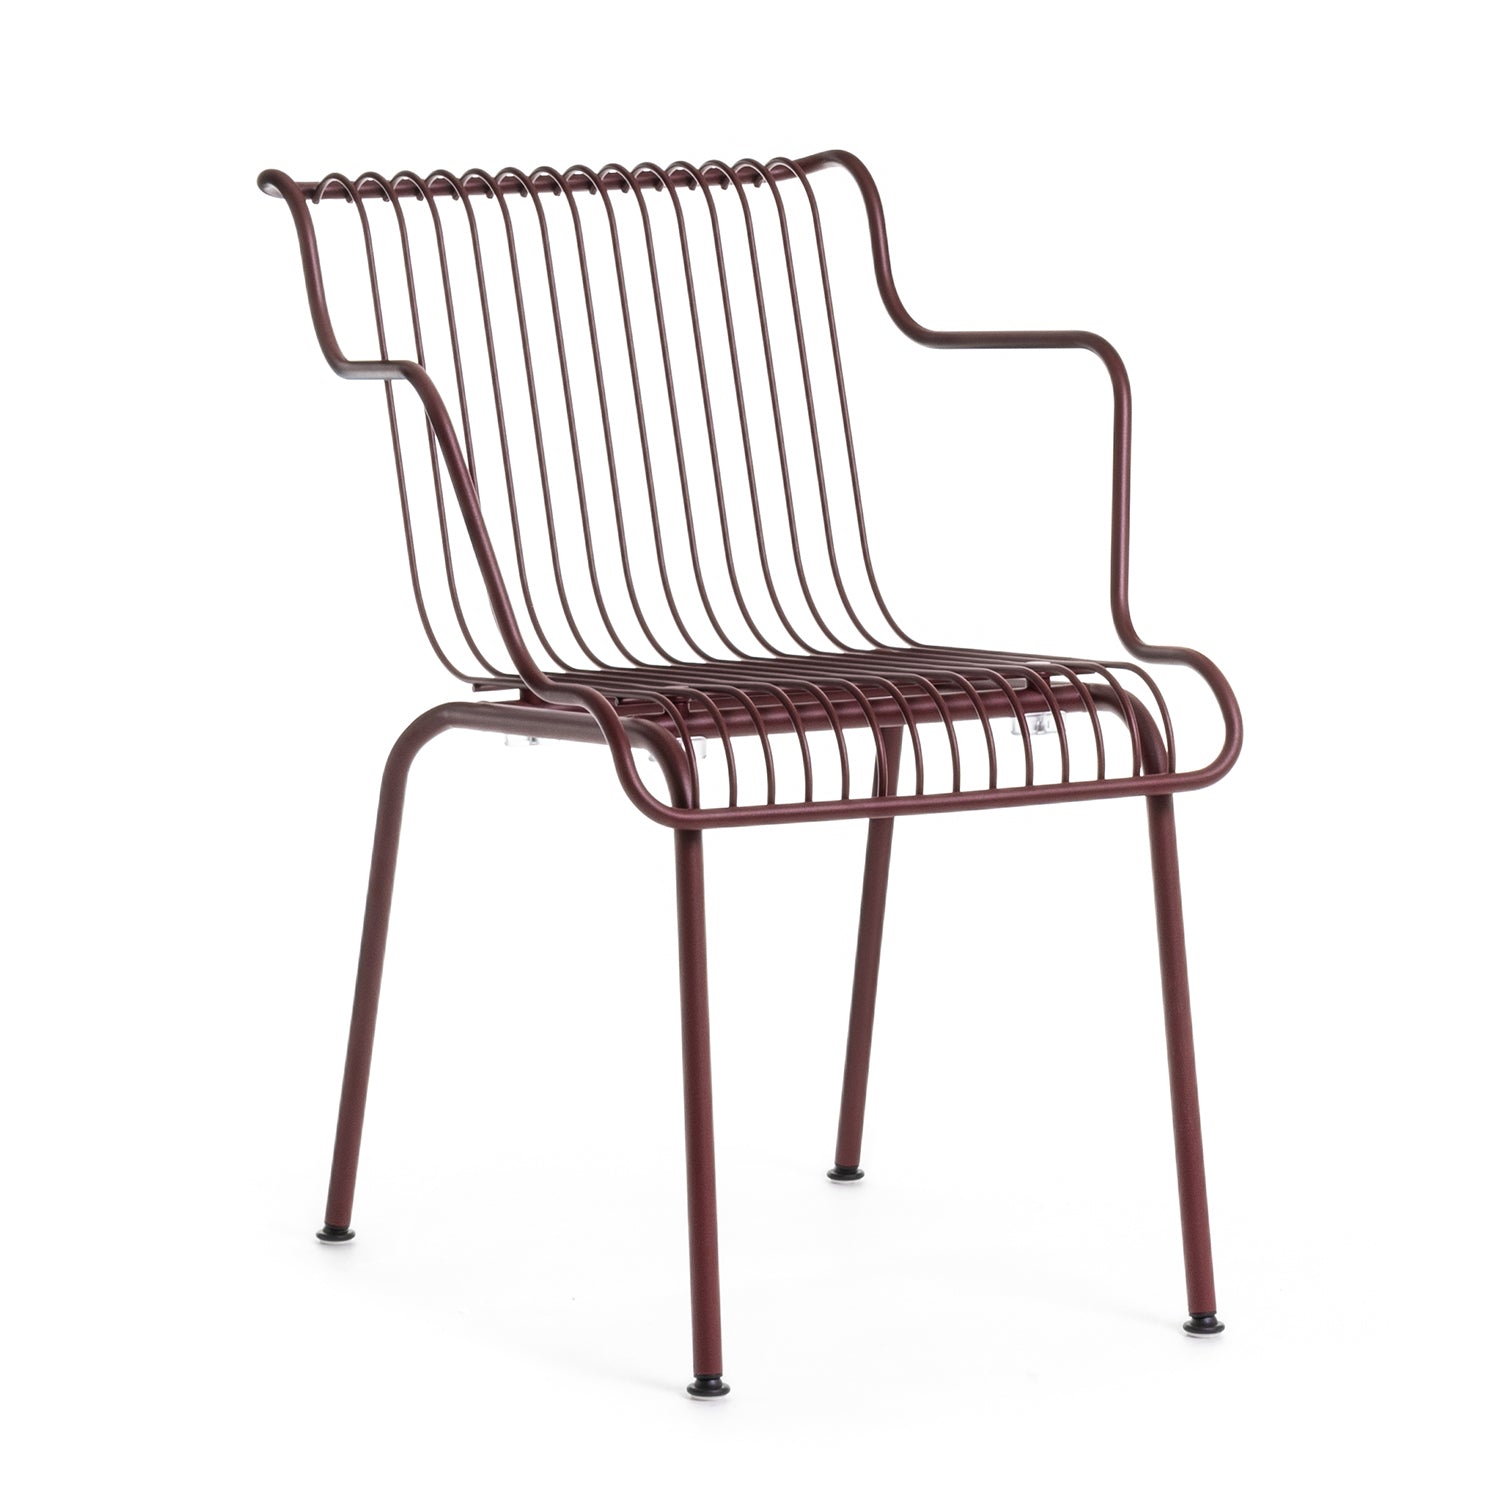 Magis South Dining Armchair in bordeaux